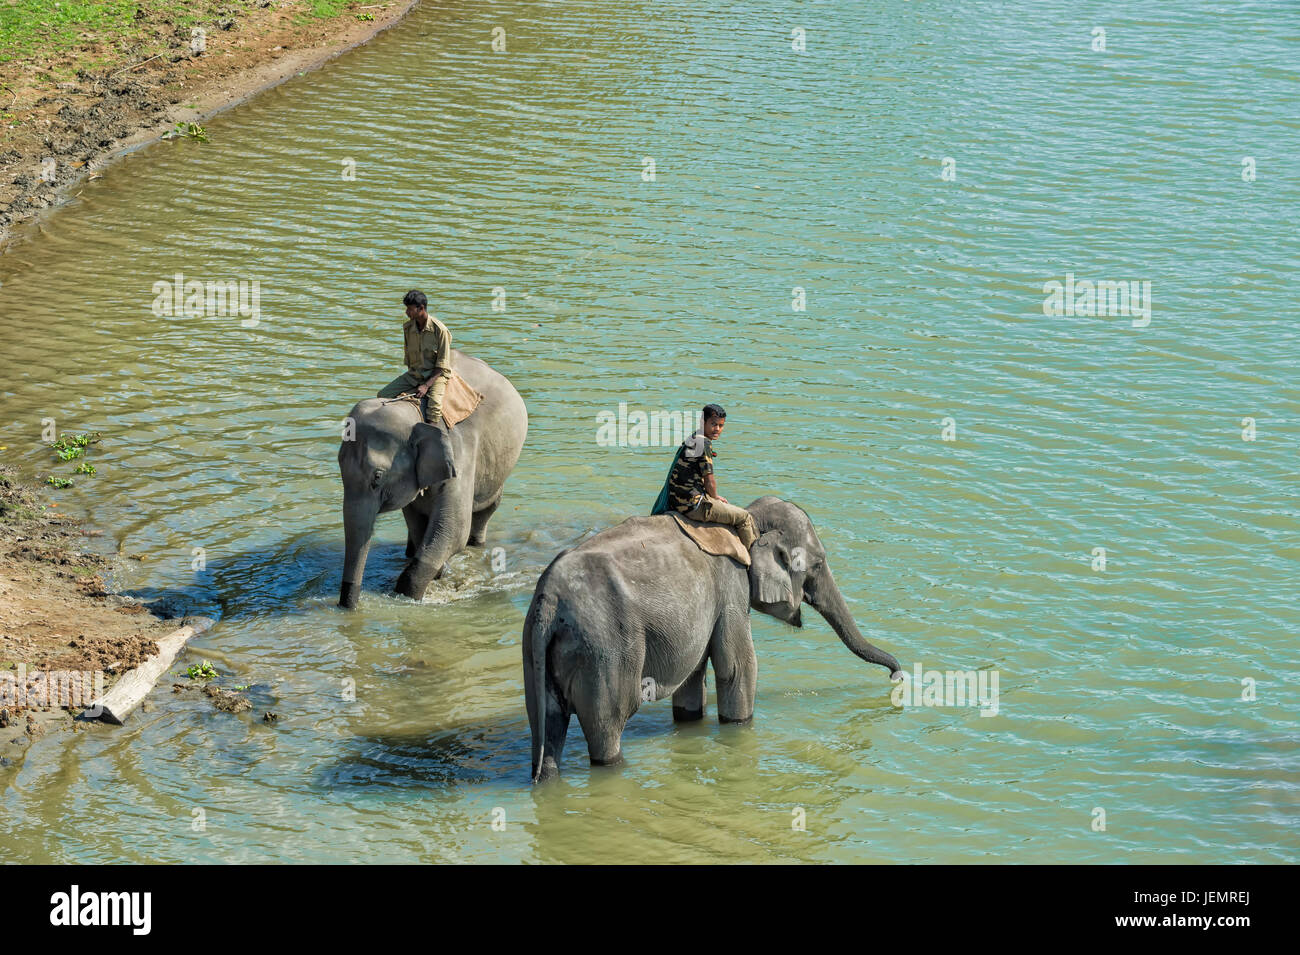 Two Mahouts riding their Indian elephants (Elephas maximus indicus) in the river, Kaziranga National Park, Assam, India Stock Photo